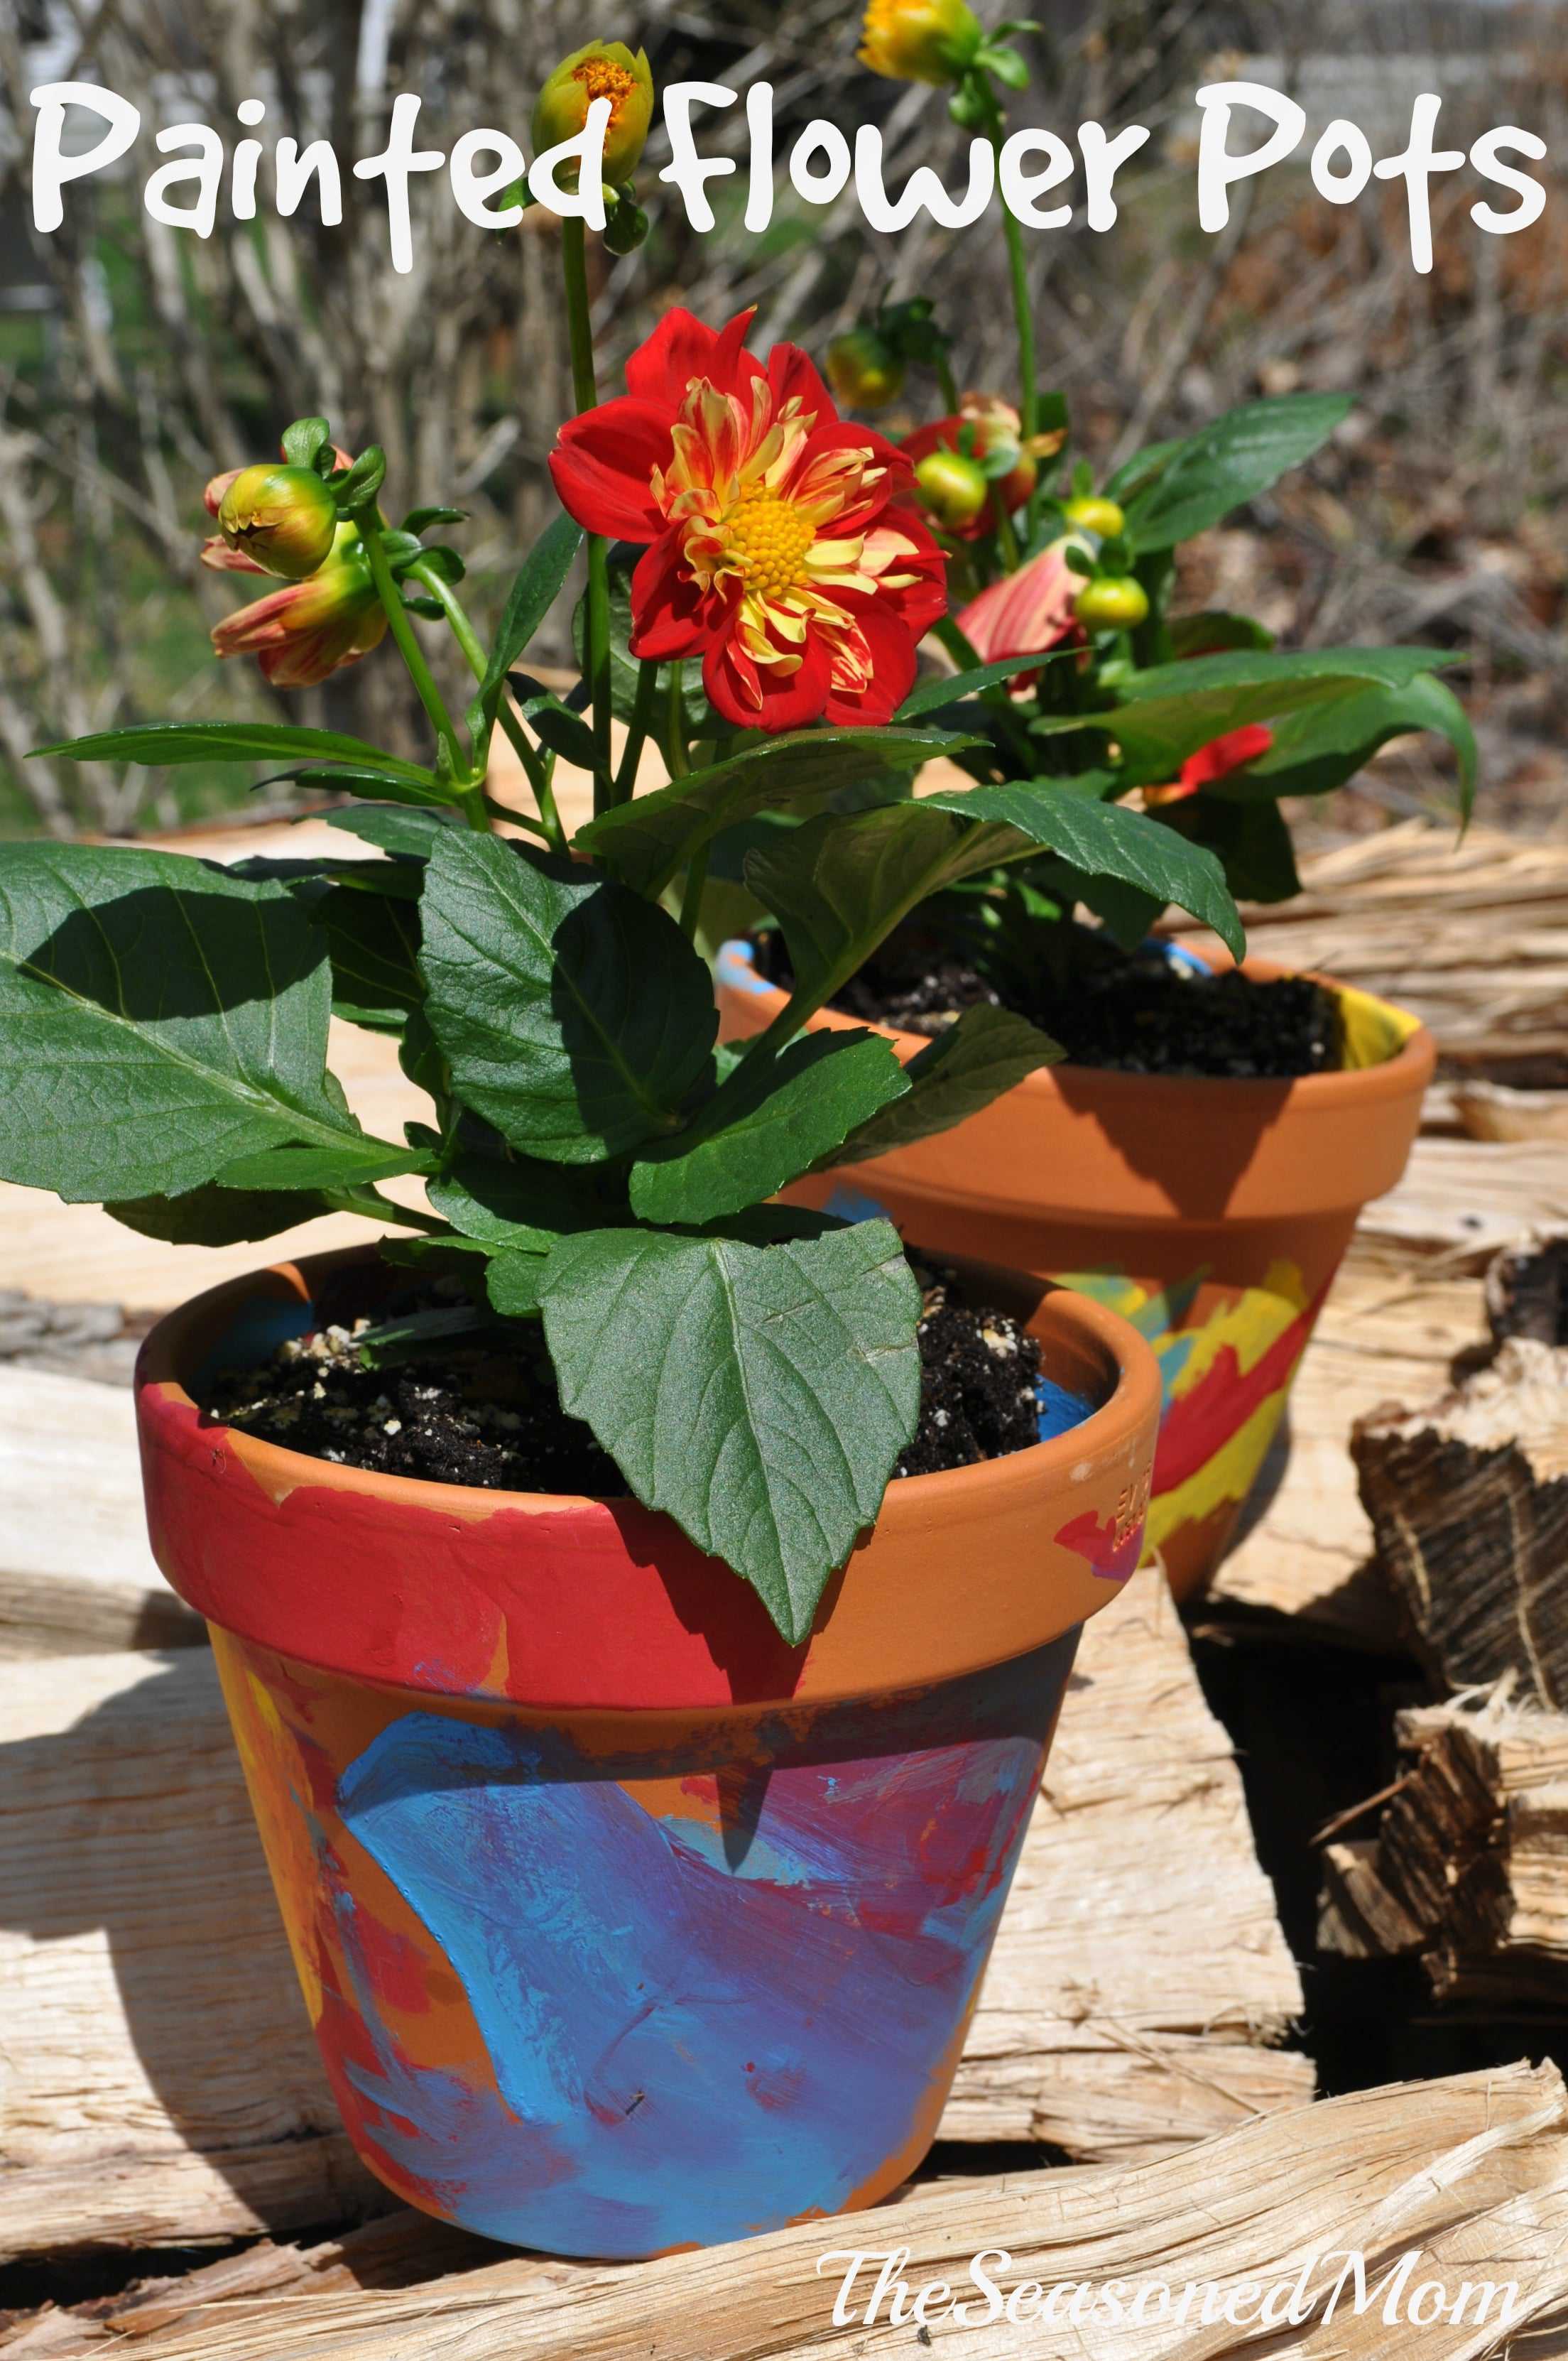 Homemade Mother's Day Gift: Painted Flower Pots - The Seasoned Mom